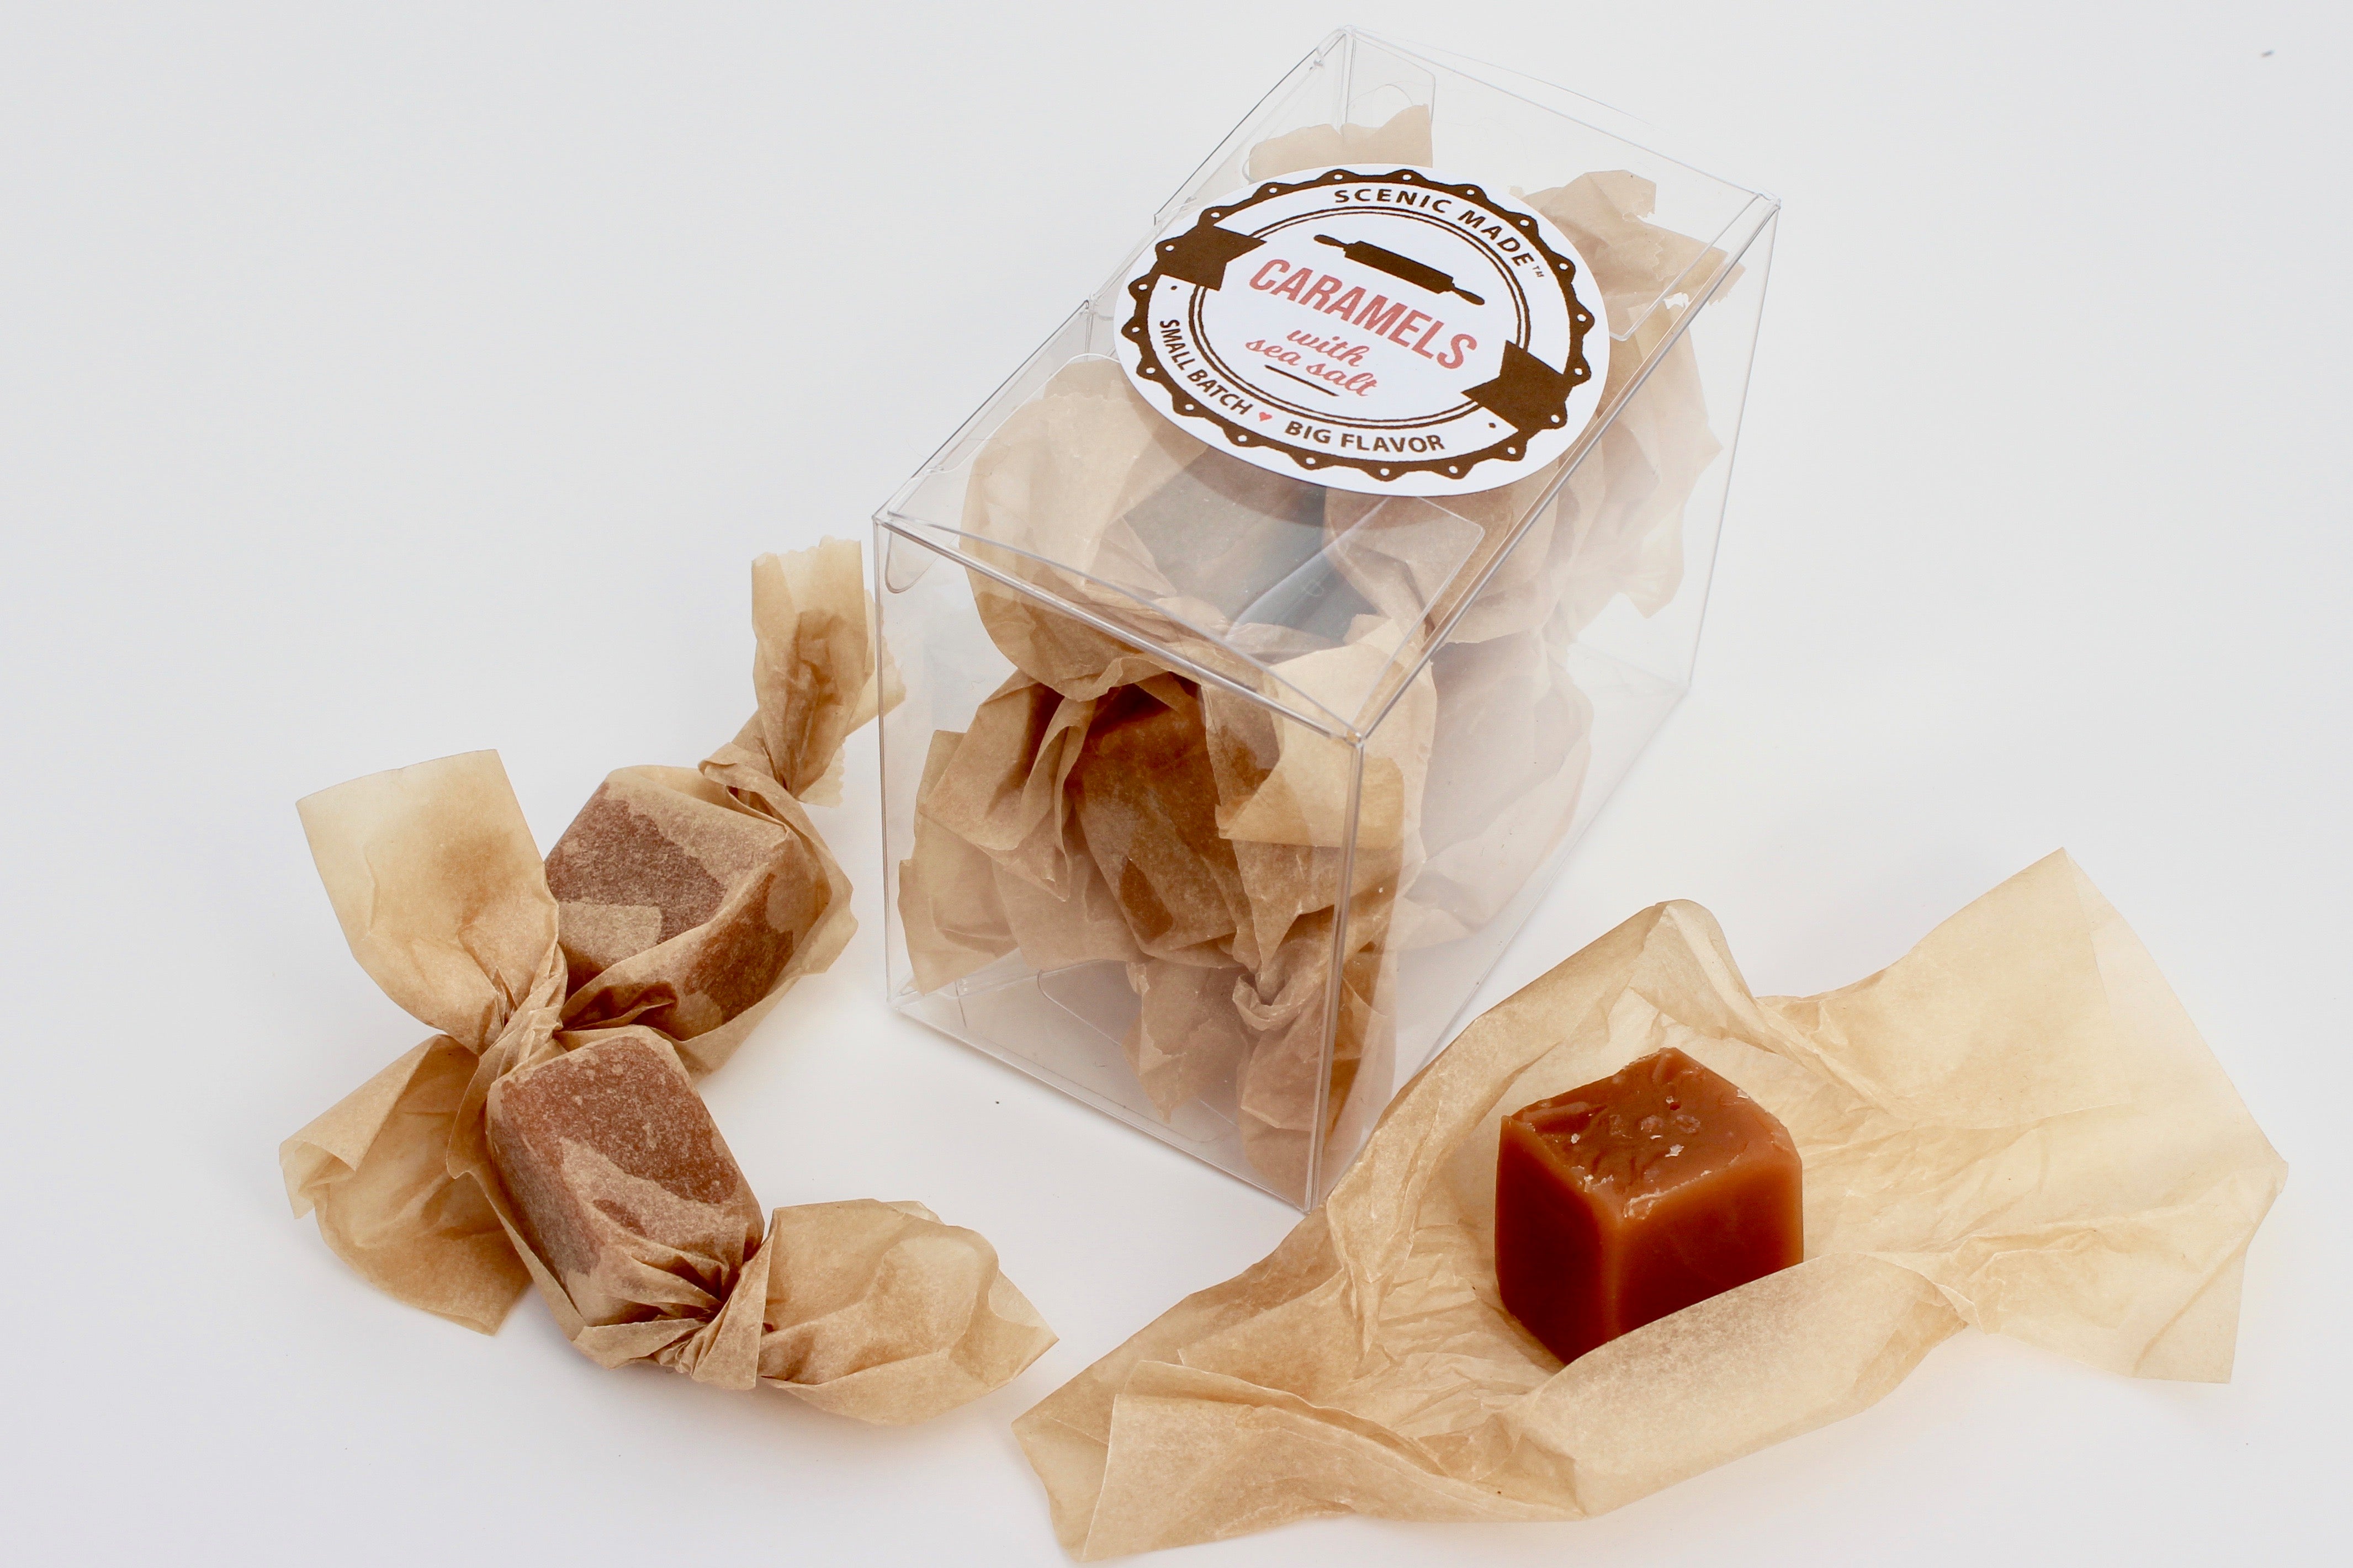 Sweet, chewy caramels, individually wrapped in unbleached parchment paper. 8 homemade caramels, individually wrapped and packaged in a clear, rectangular, food safe container with an attractive label on the front.